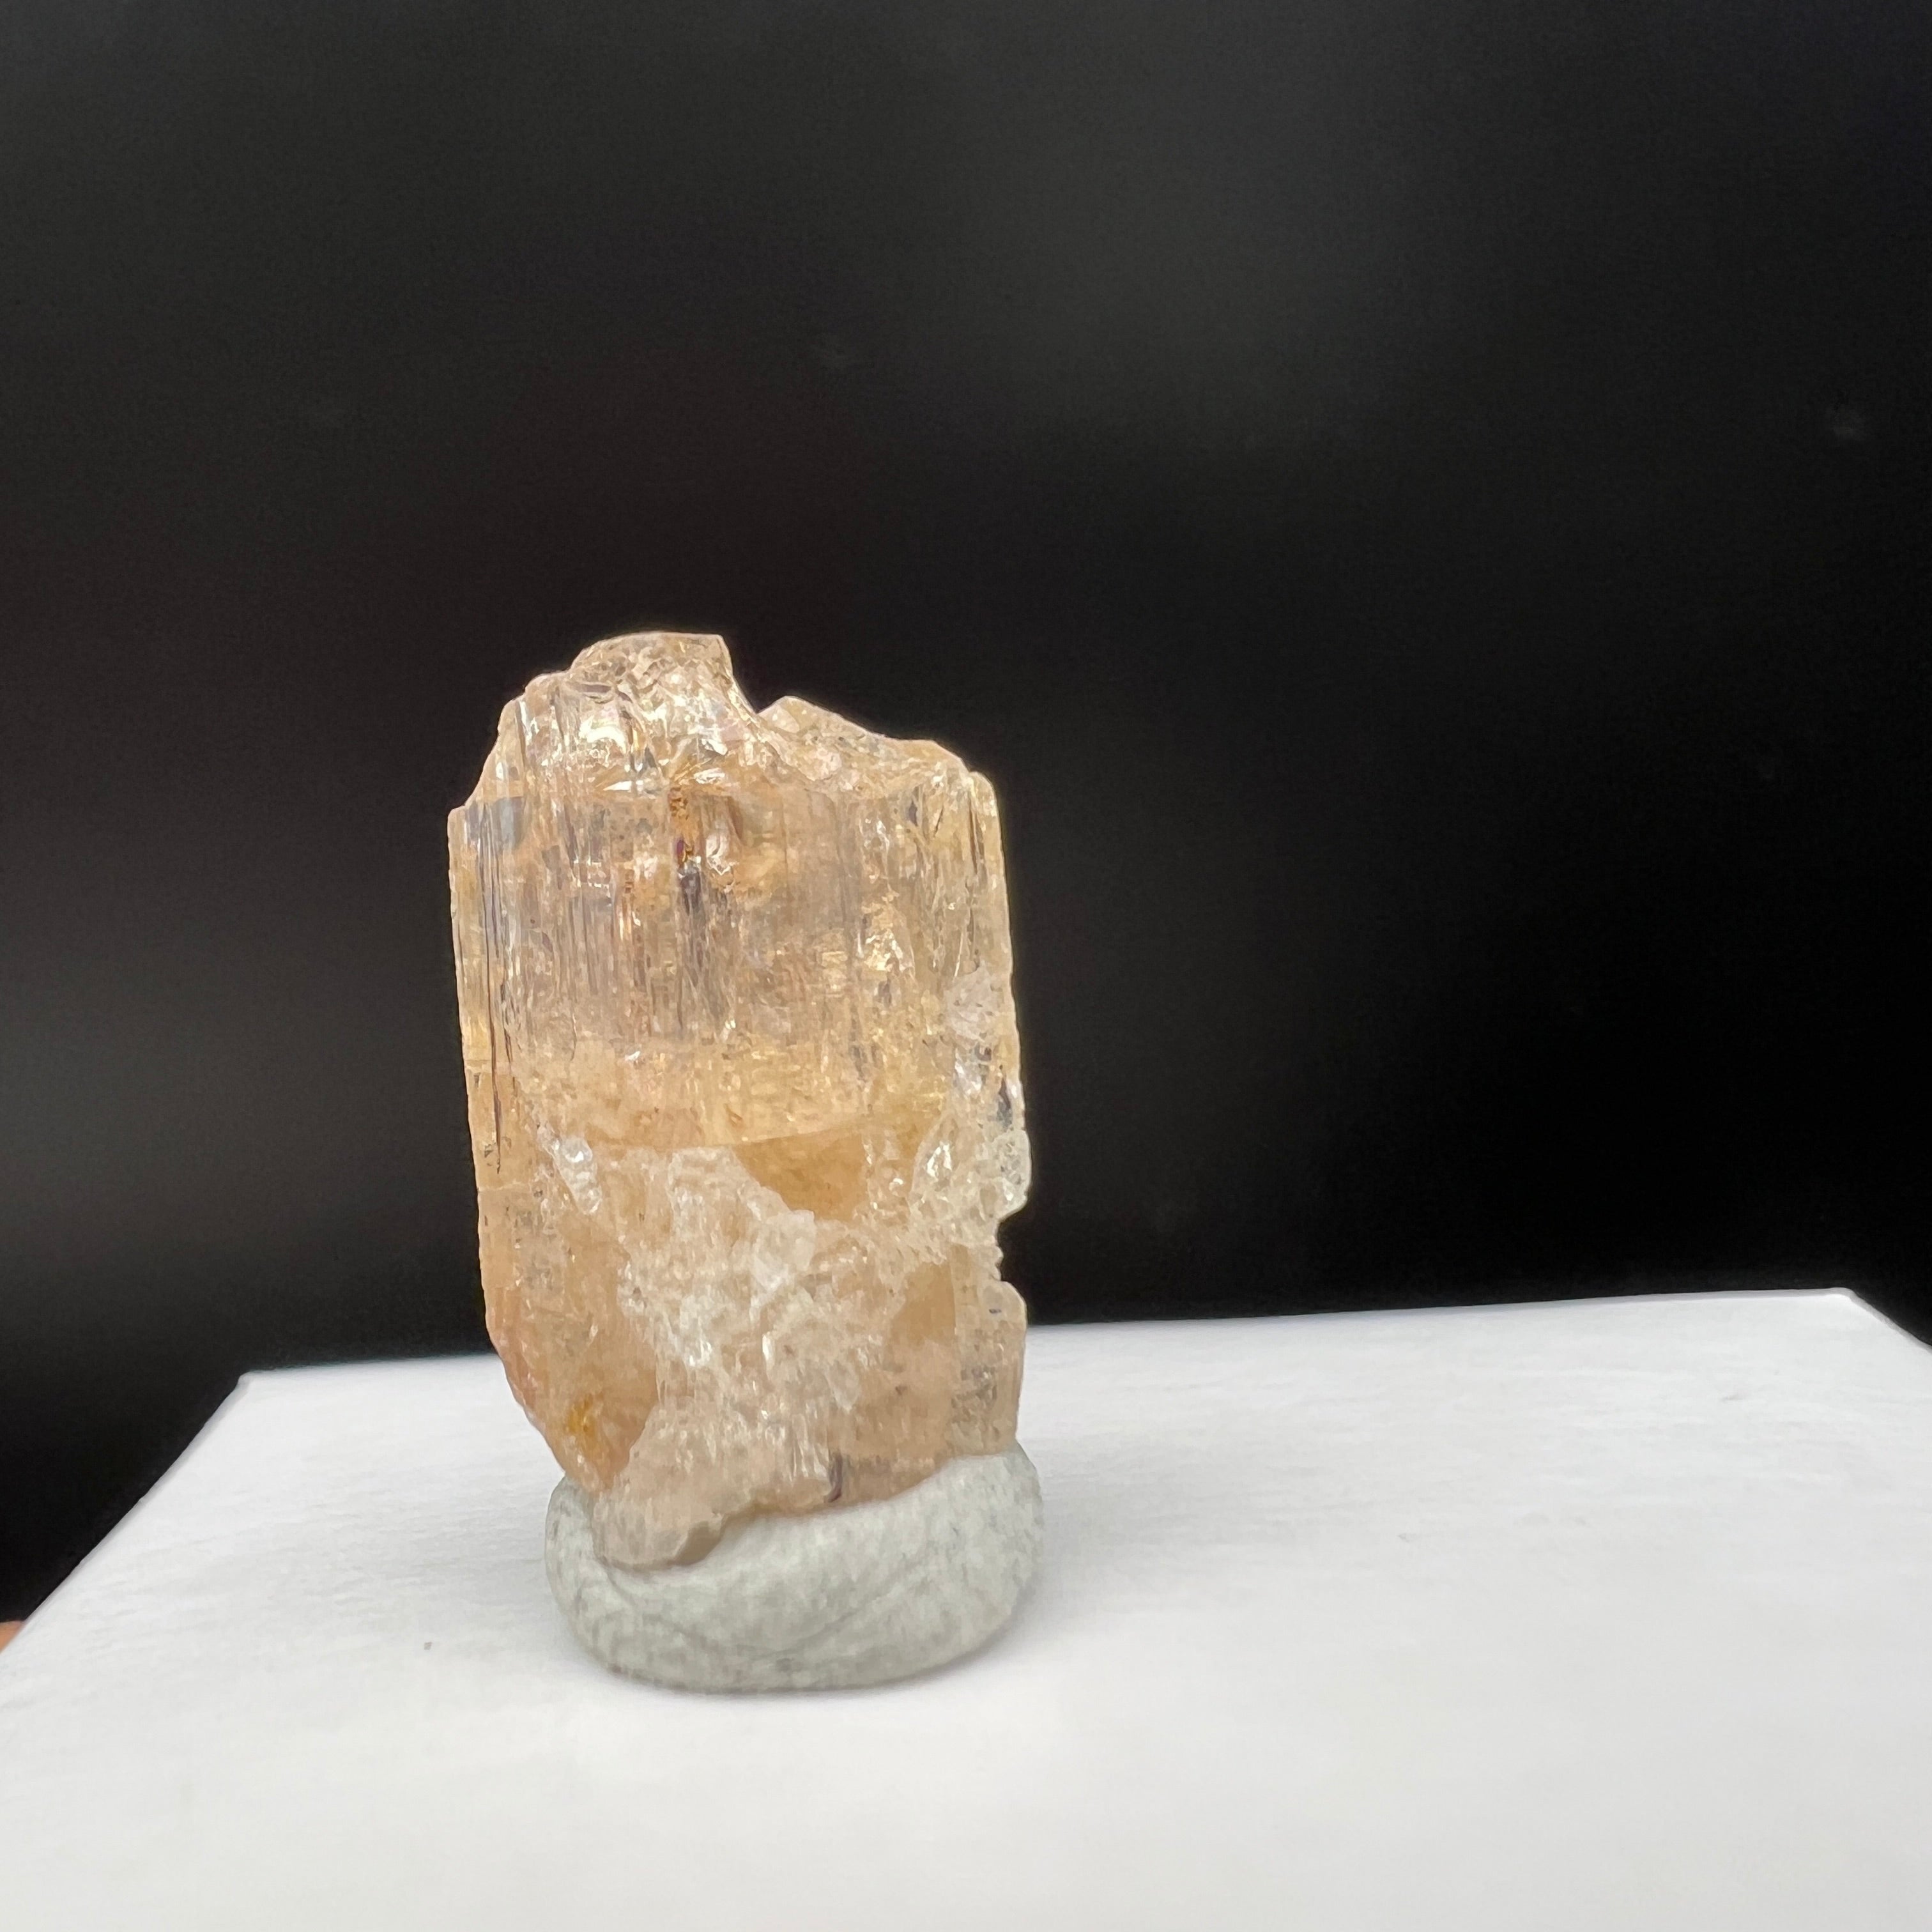 Imperial Topaz Non-Terminated Crystal - 016